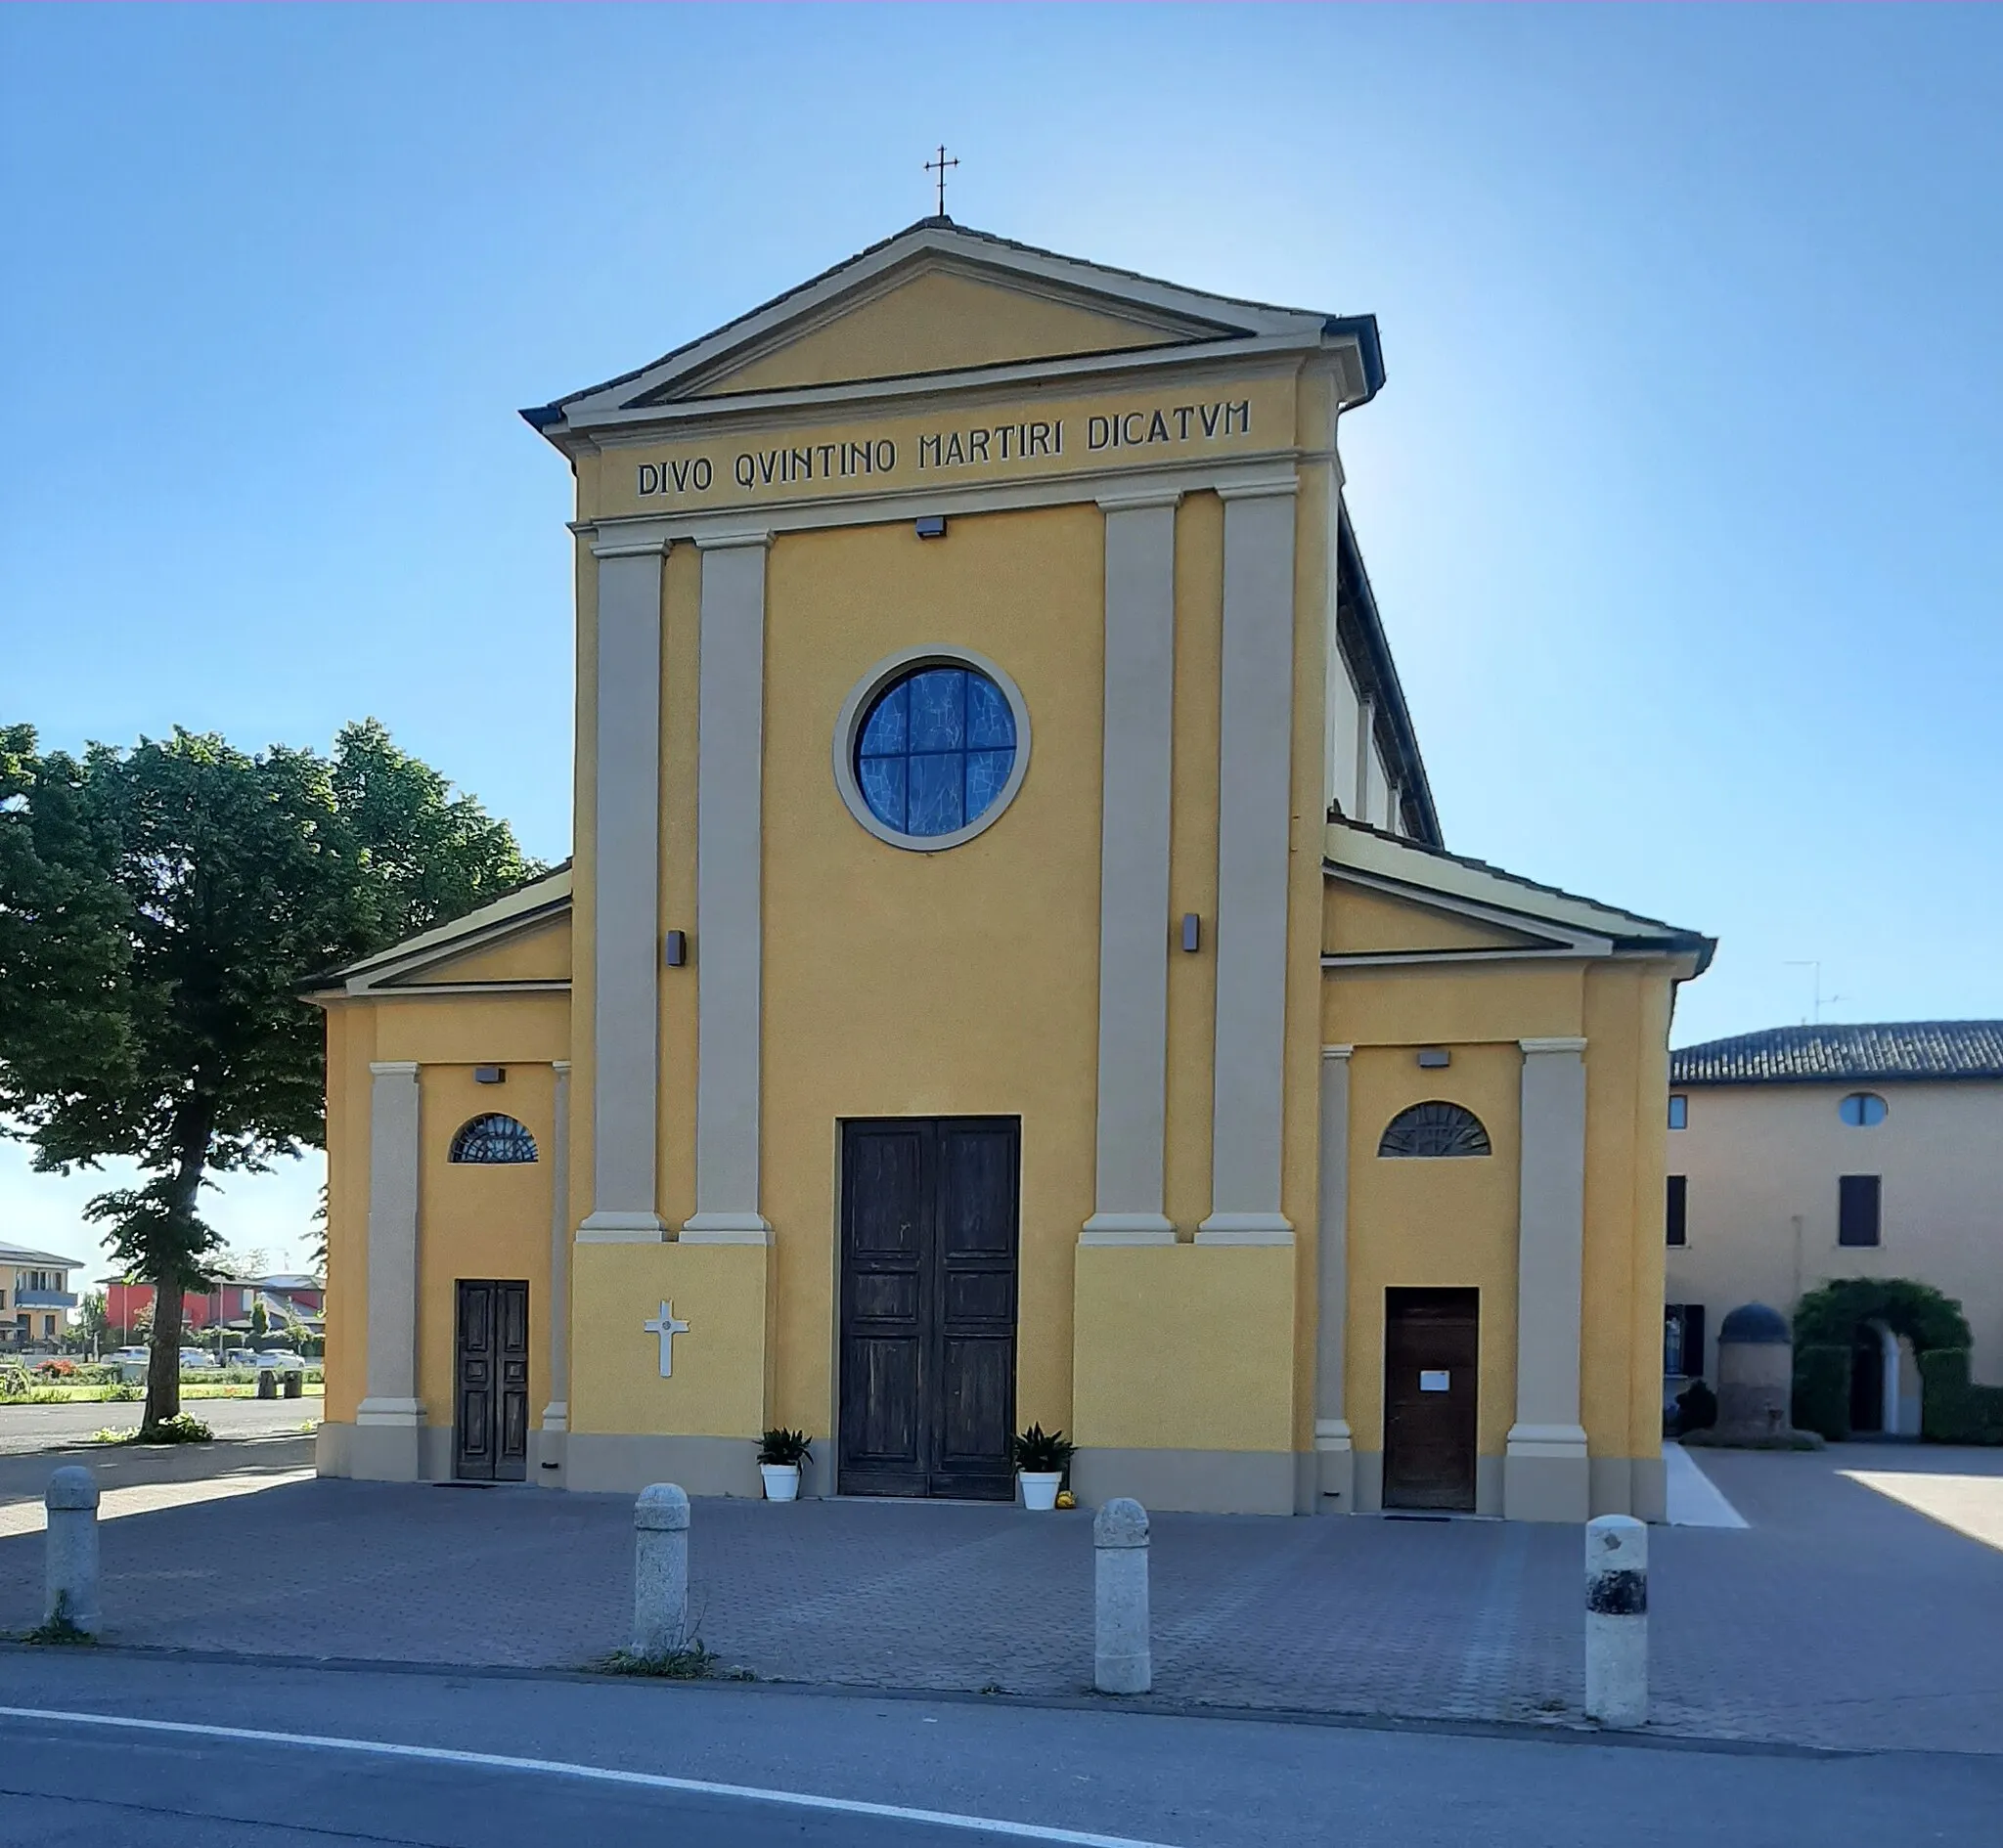 Photo showing: The church of San Quentin, located in Gossolengo, Piacenza, Italy